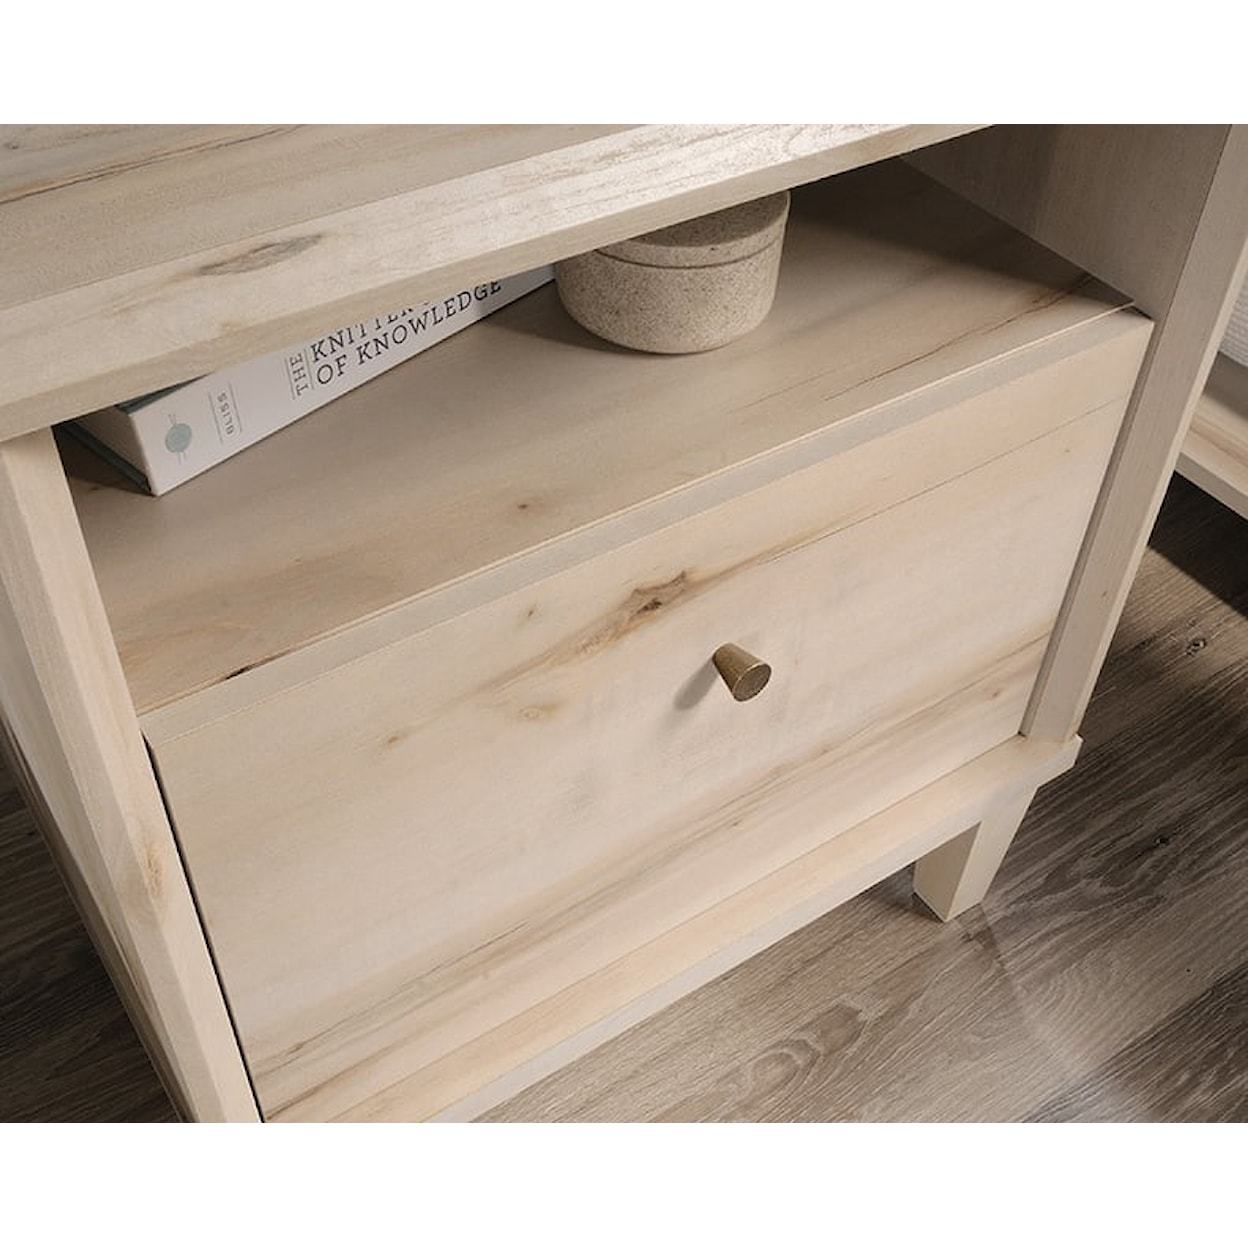 Sauder Willow Place One-Drawer Nightstand